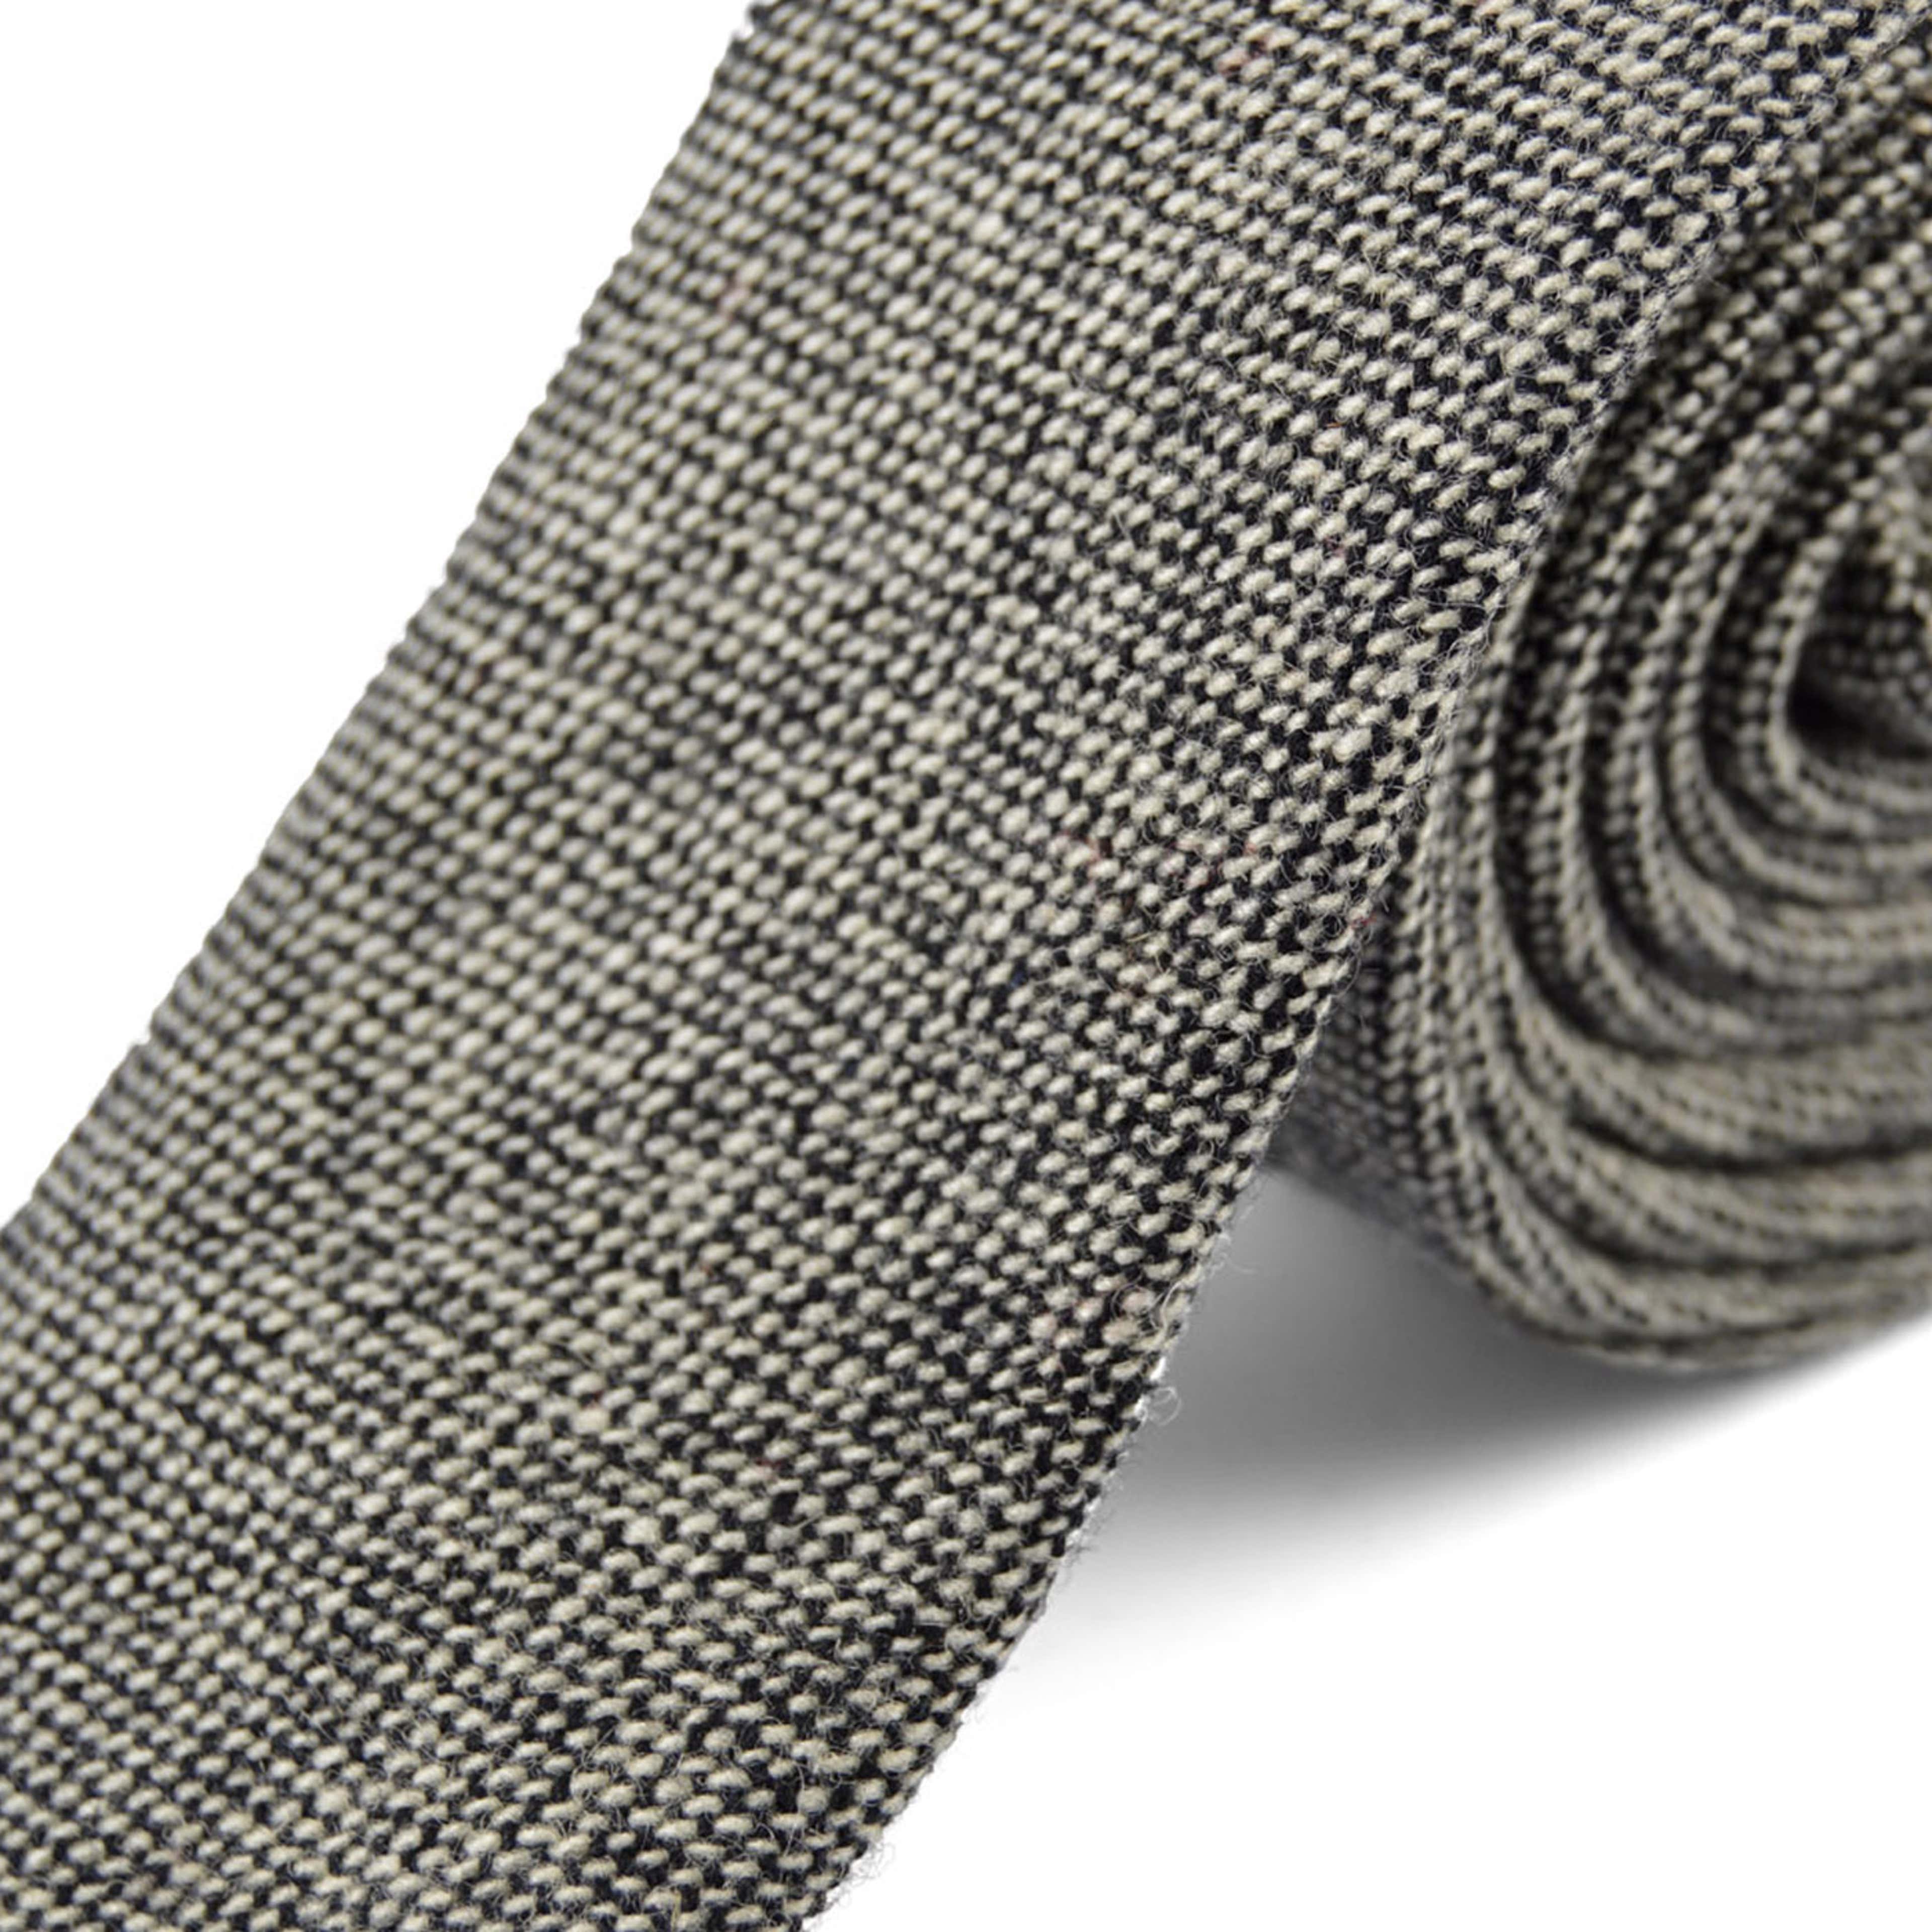 Retro Cashmere Wool Tie - 2 - hover gallery